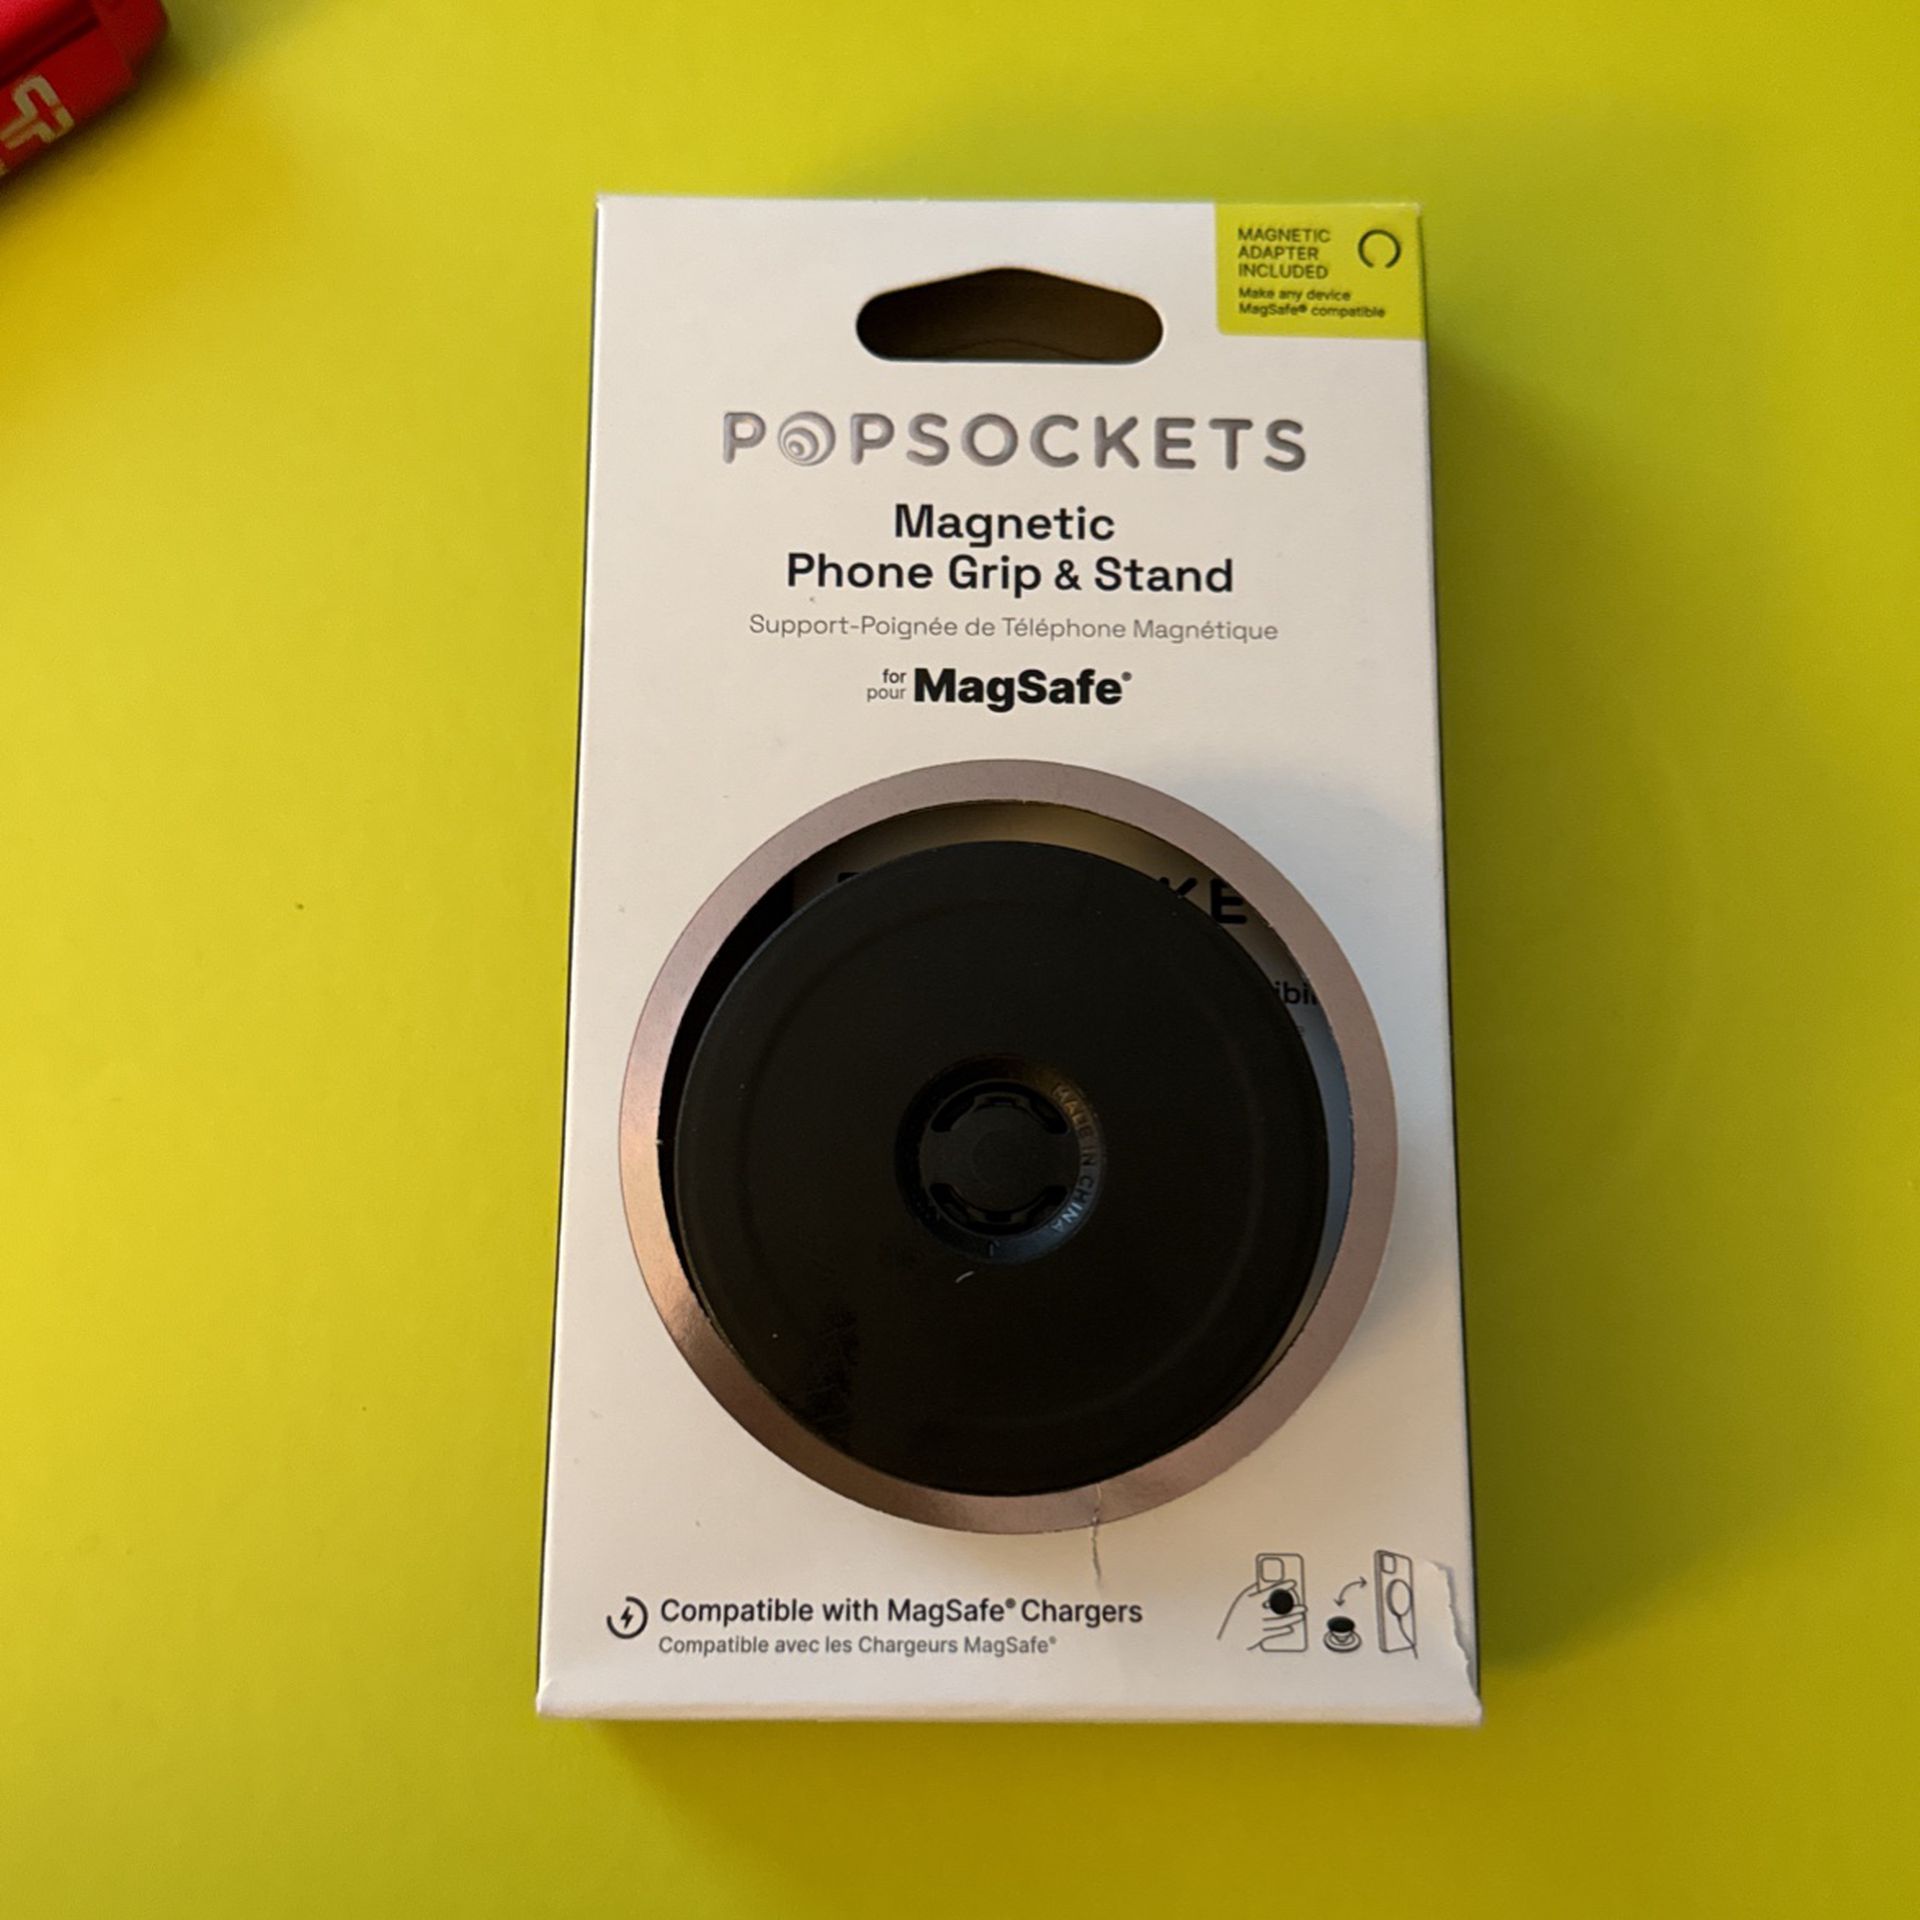 POPSOCKETS MAGNETIC PHONE GRIP & STAND 